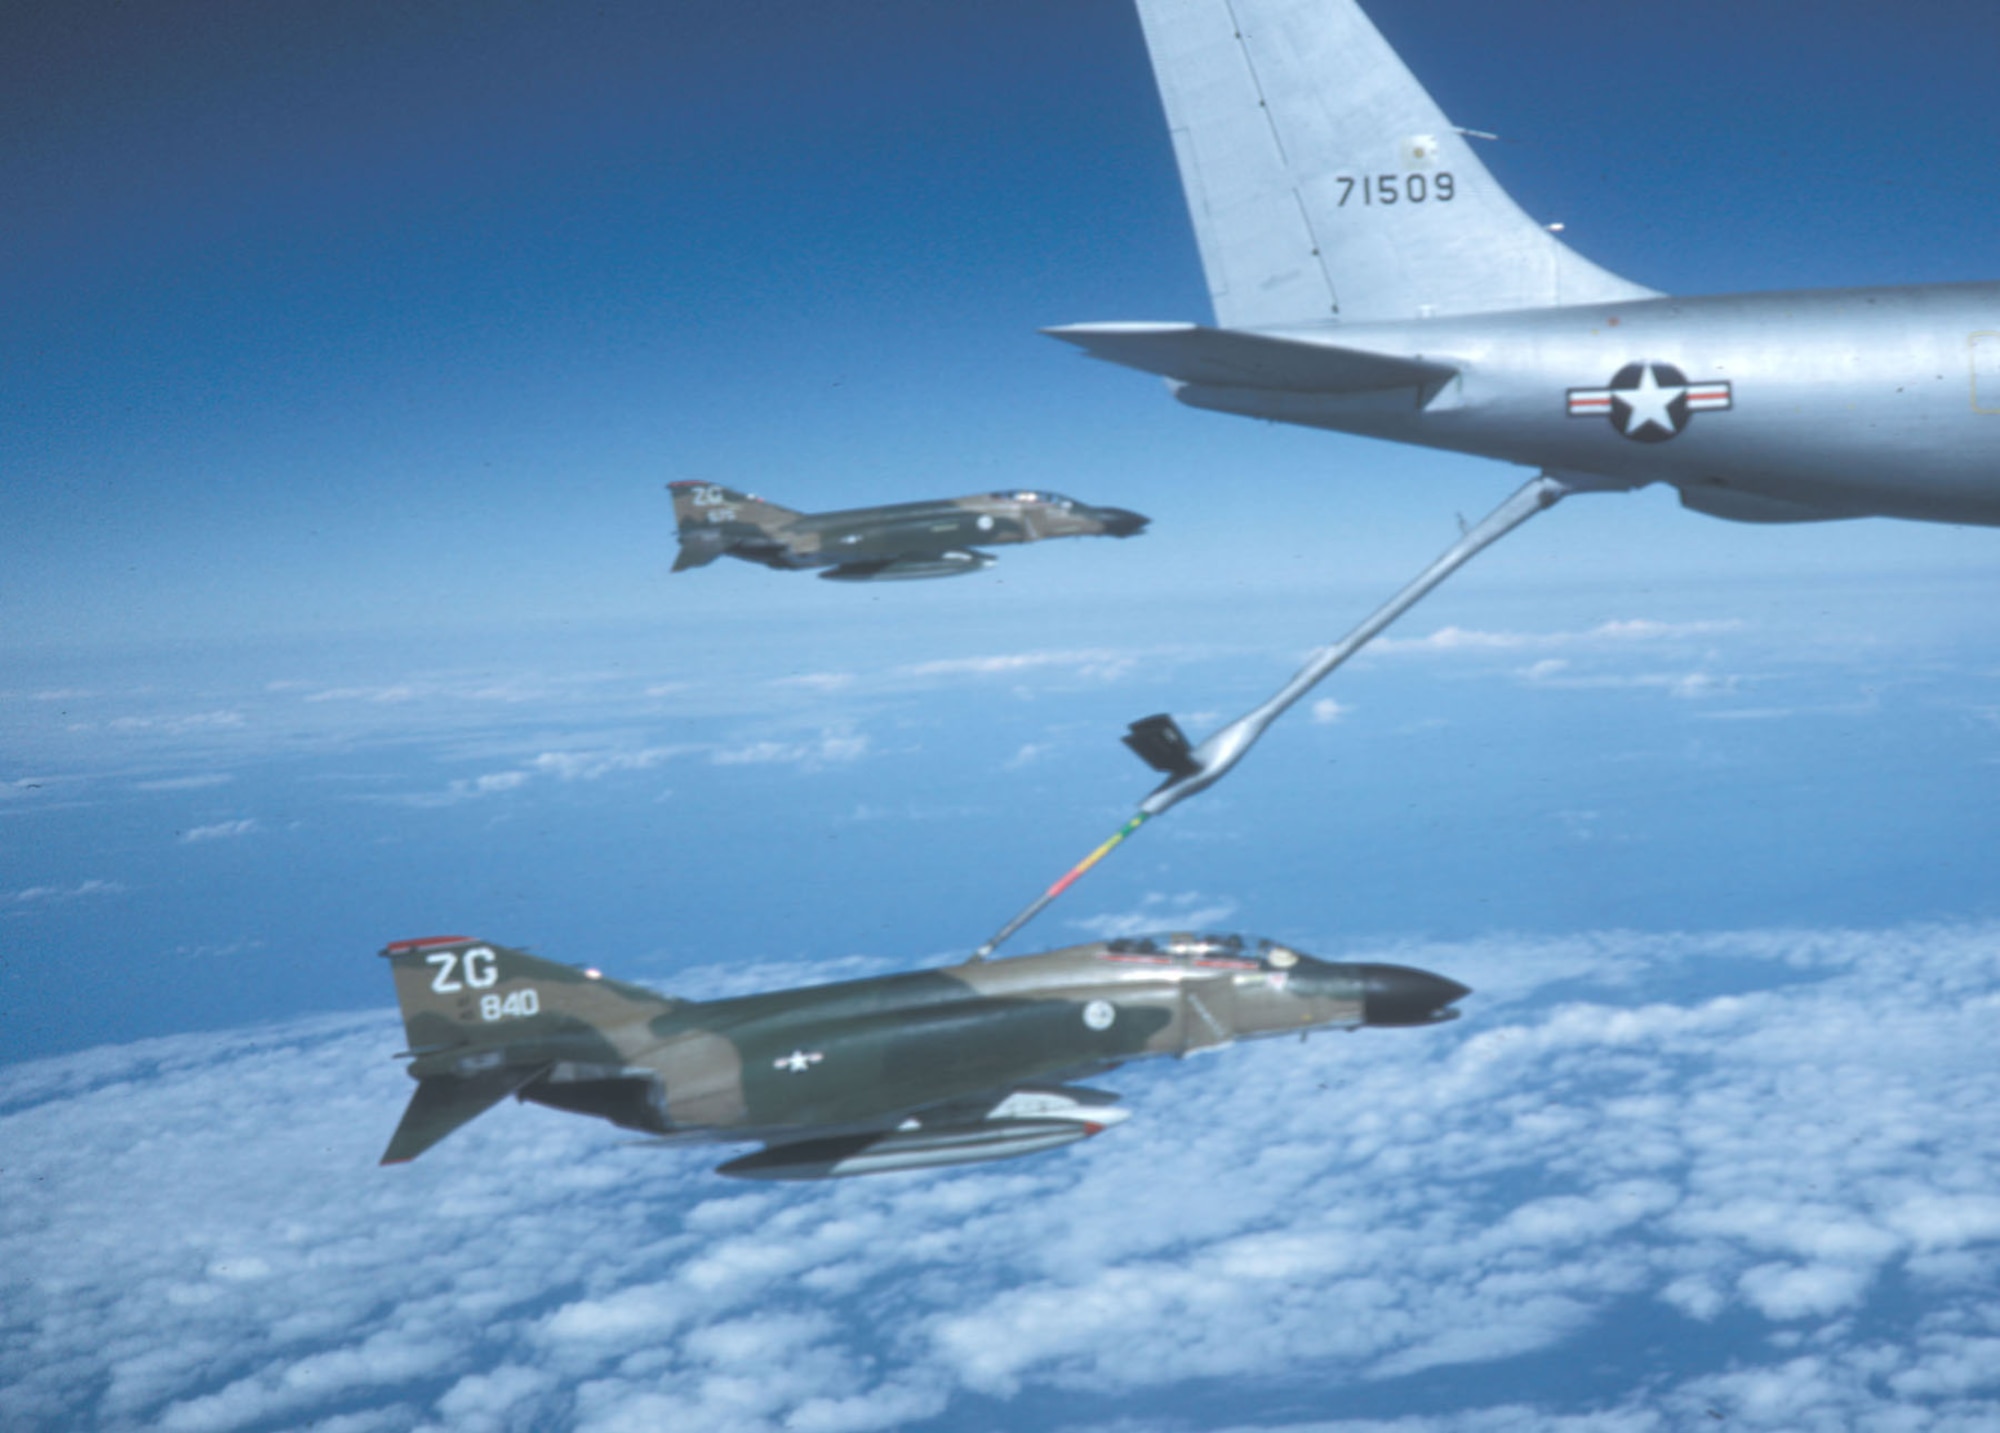 Two F-4C Wild Weasel aircraft flying back to Kadena Air Base, Okinawa, after the war's end. The F-4C in the back, tail number 675, is being flown by Capt. Myers. (U.S. Air Force photo)